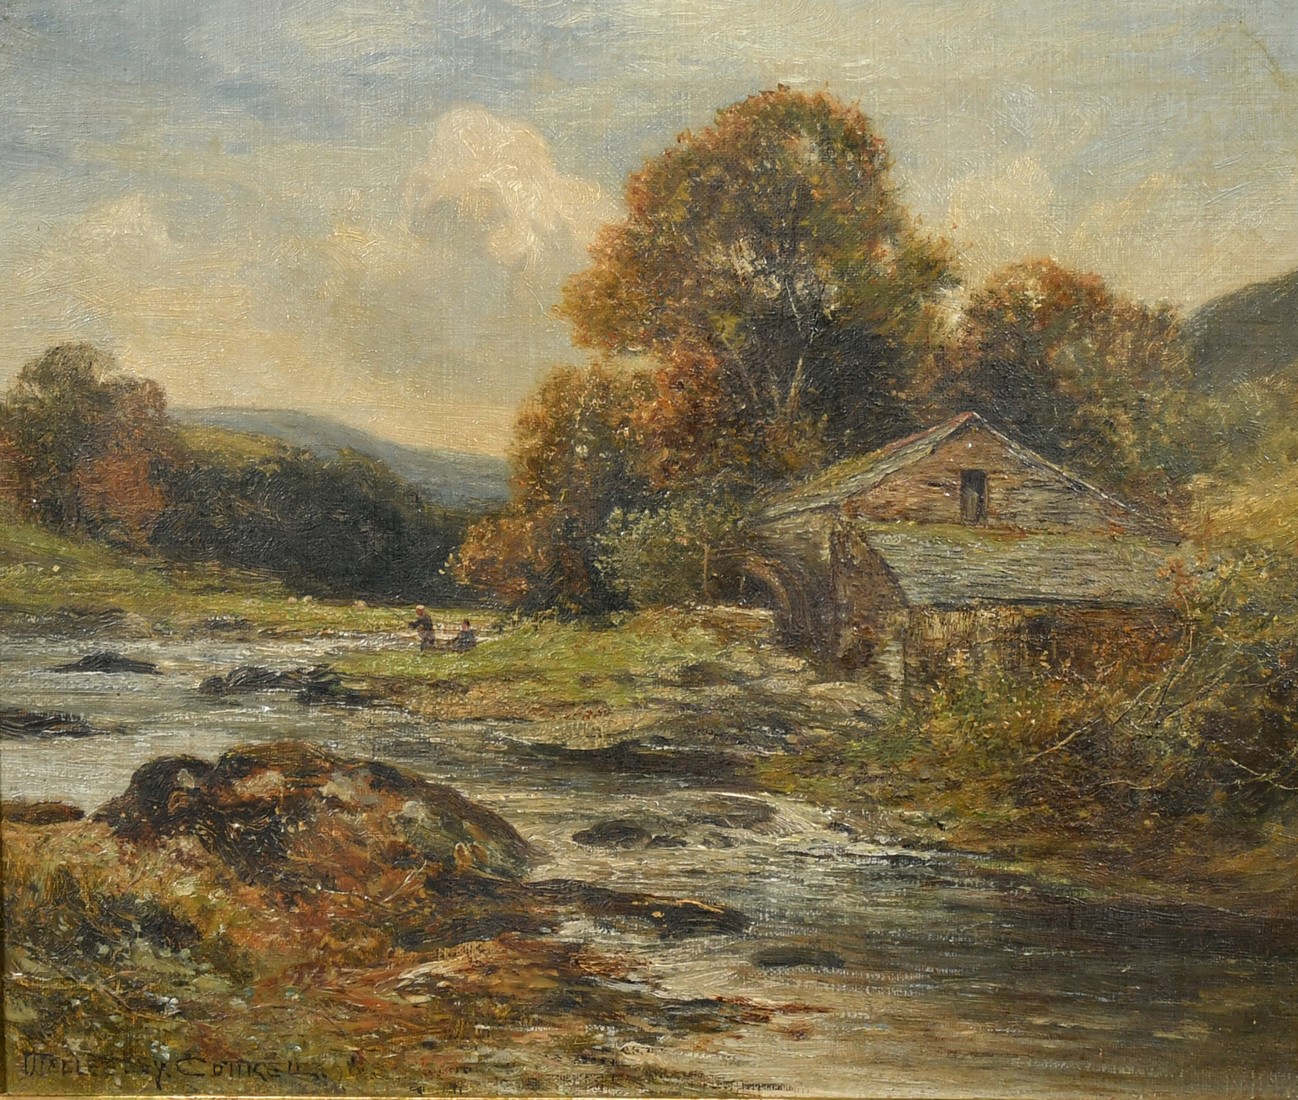 Arthur Wellesley Cottrell, circa 1898, 'An Old Mill, North Wales', anglers by a river, oil on canvas